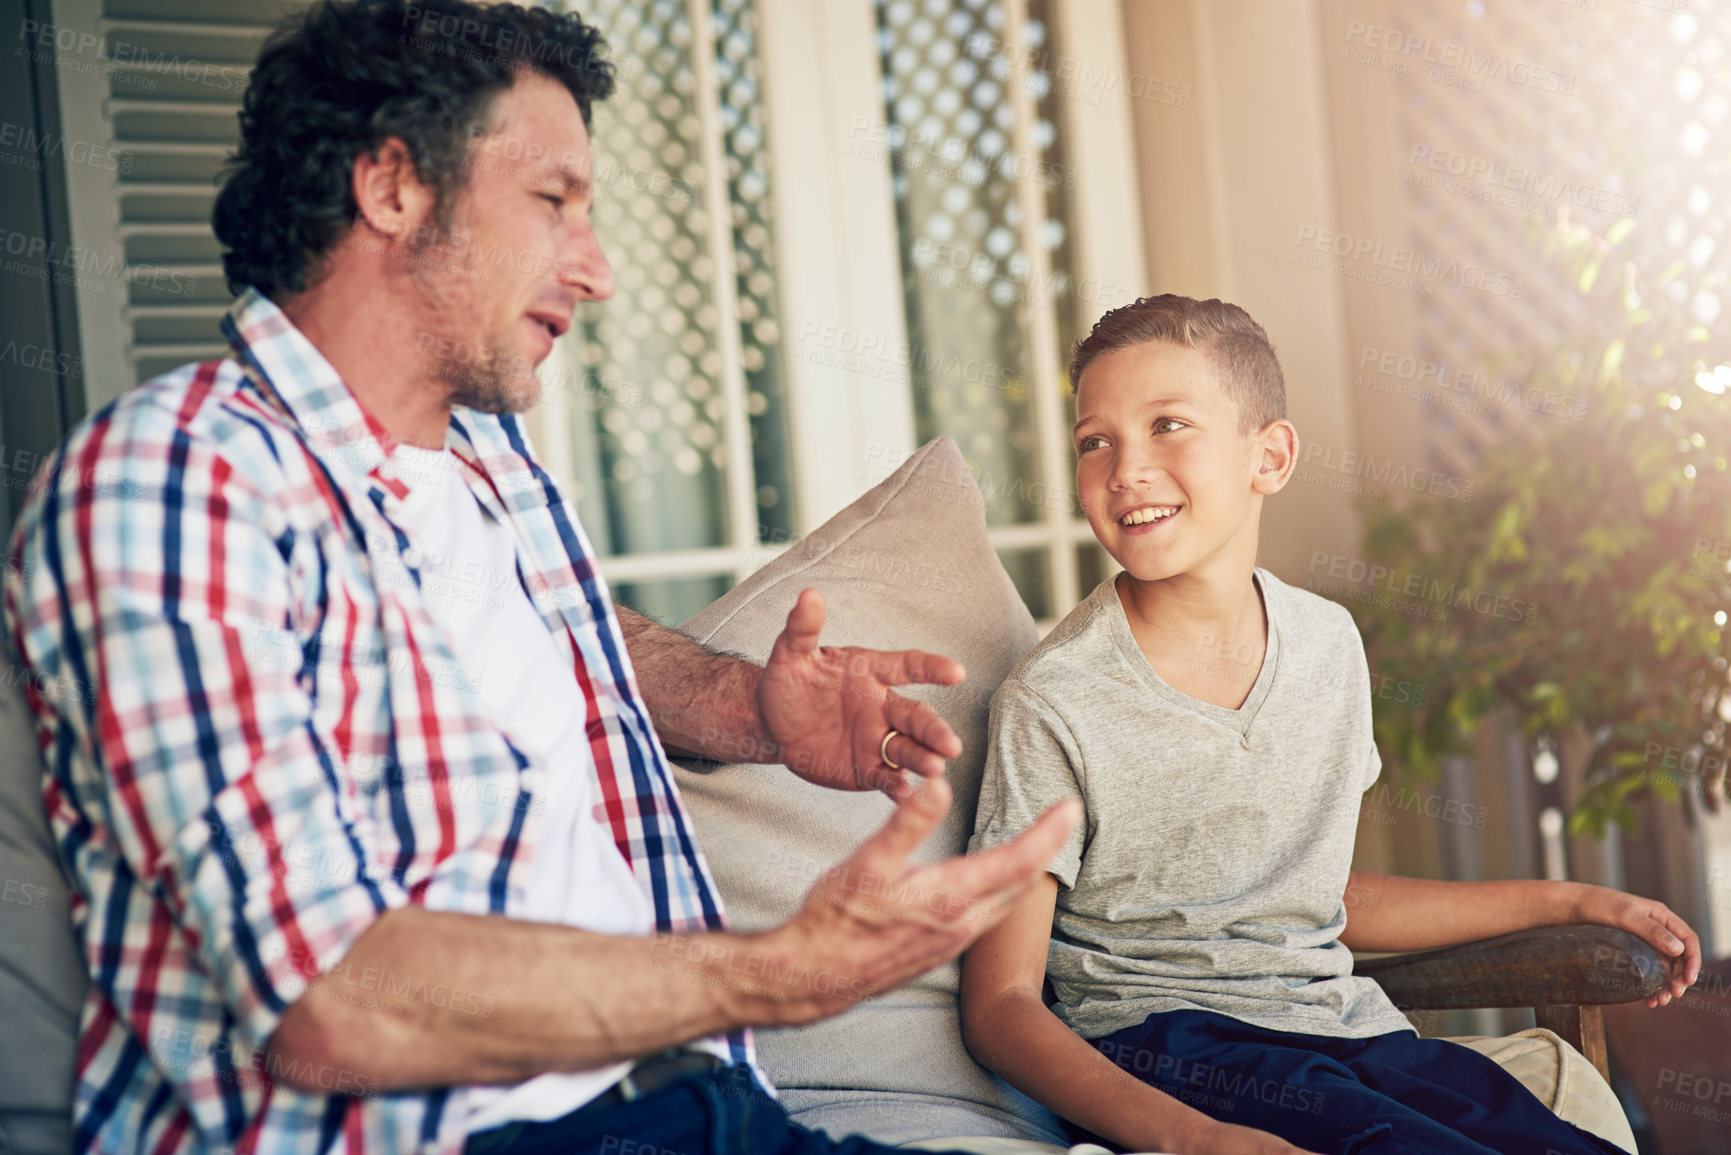 Buy stock photo Cropped shot of a father talking to his young son outside